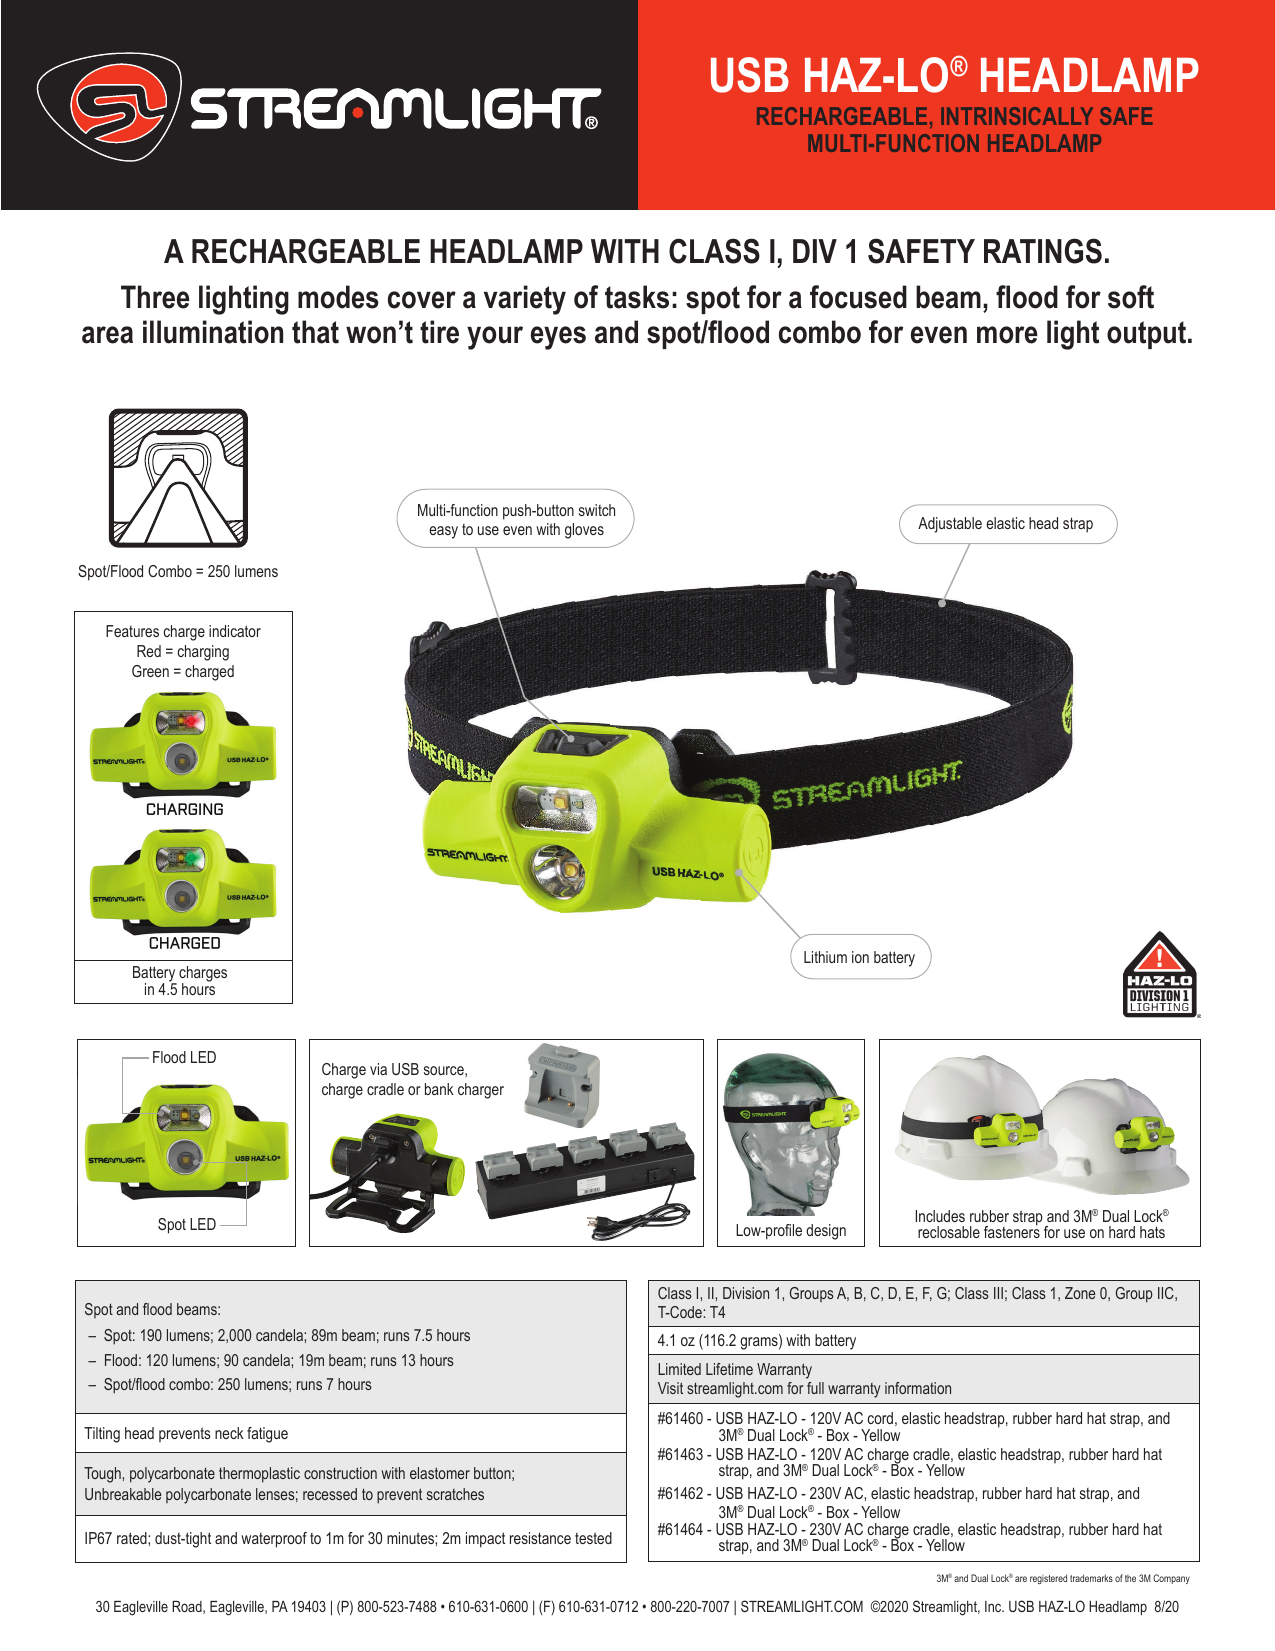 Yellow Streamlight 61463 USB HAZ-LO 250-Lumen Intrinsically Safe Rechargeable Headlamp with 120V AC Charge Cradle Rubber Hard-Hat Strap and 3M Dual Lock Elastic Head-Strap